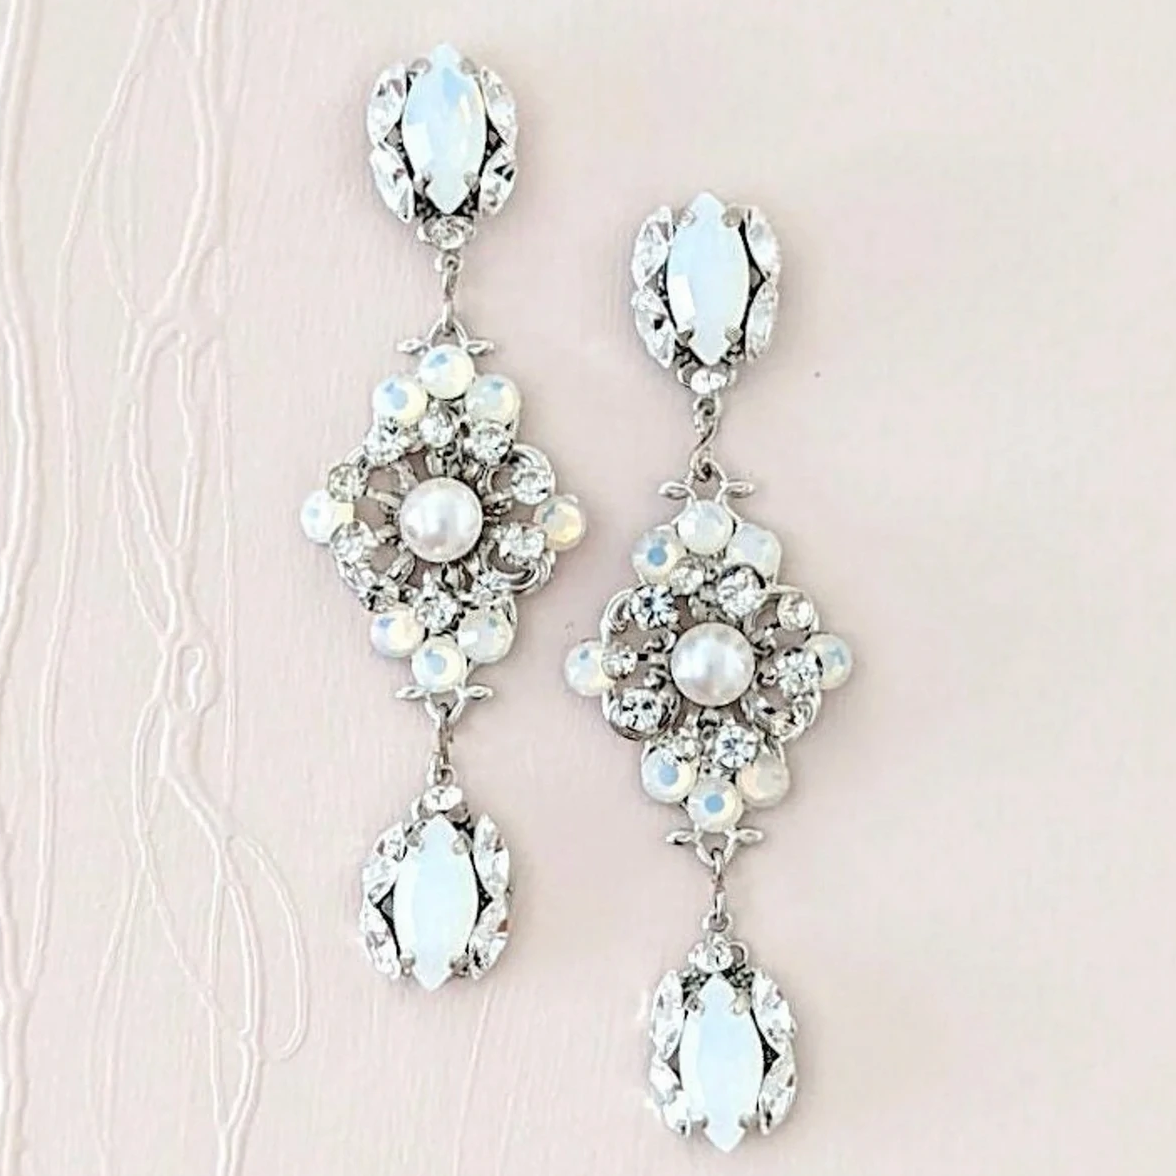 Vintage Style Long Bridal Earrings with White Opal - JazzyAndGlitzy